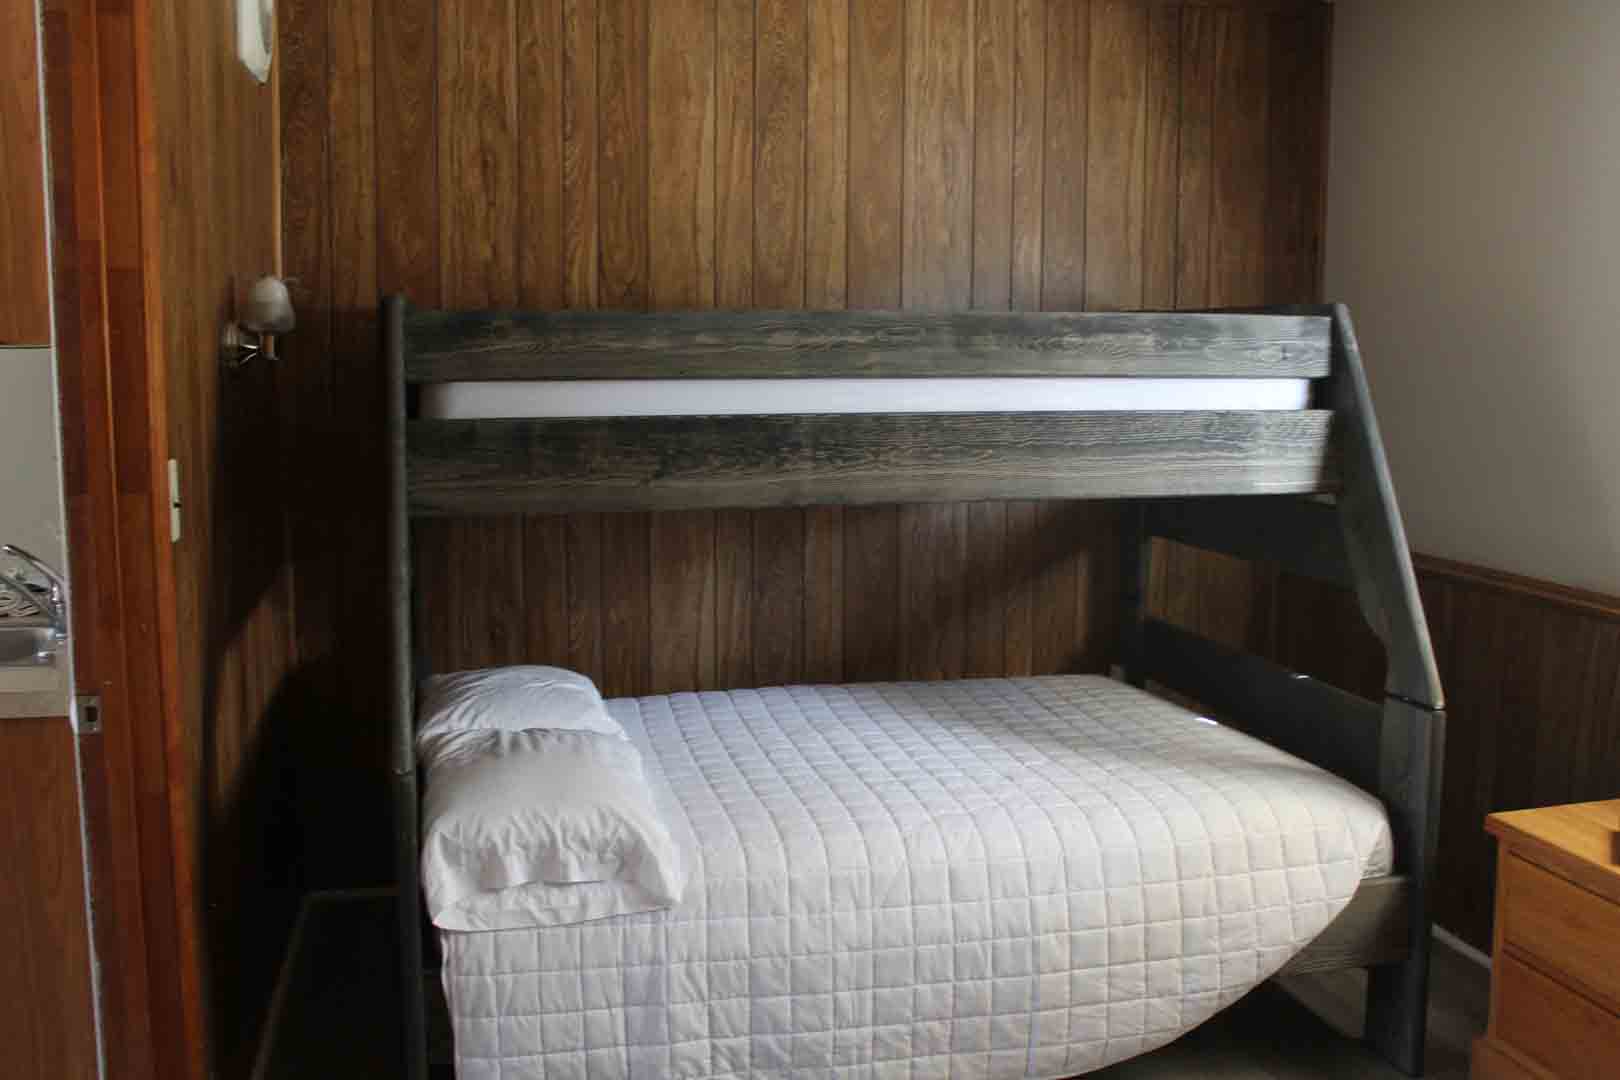 a bunk bed in a small room with wood paneling